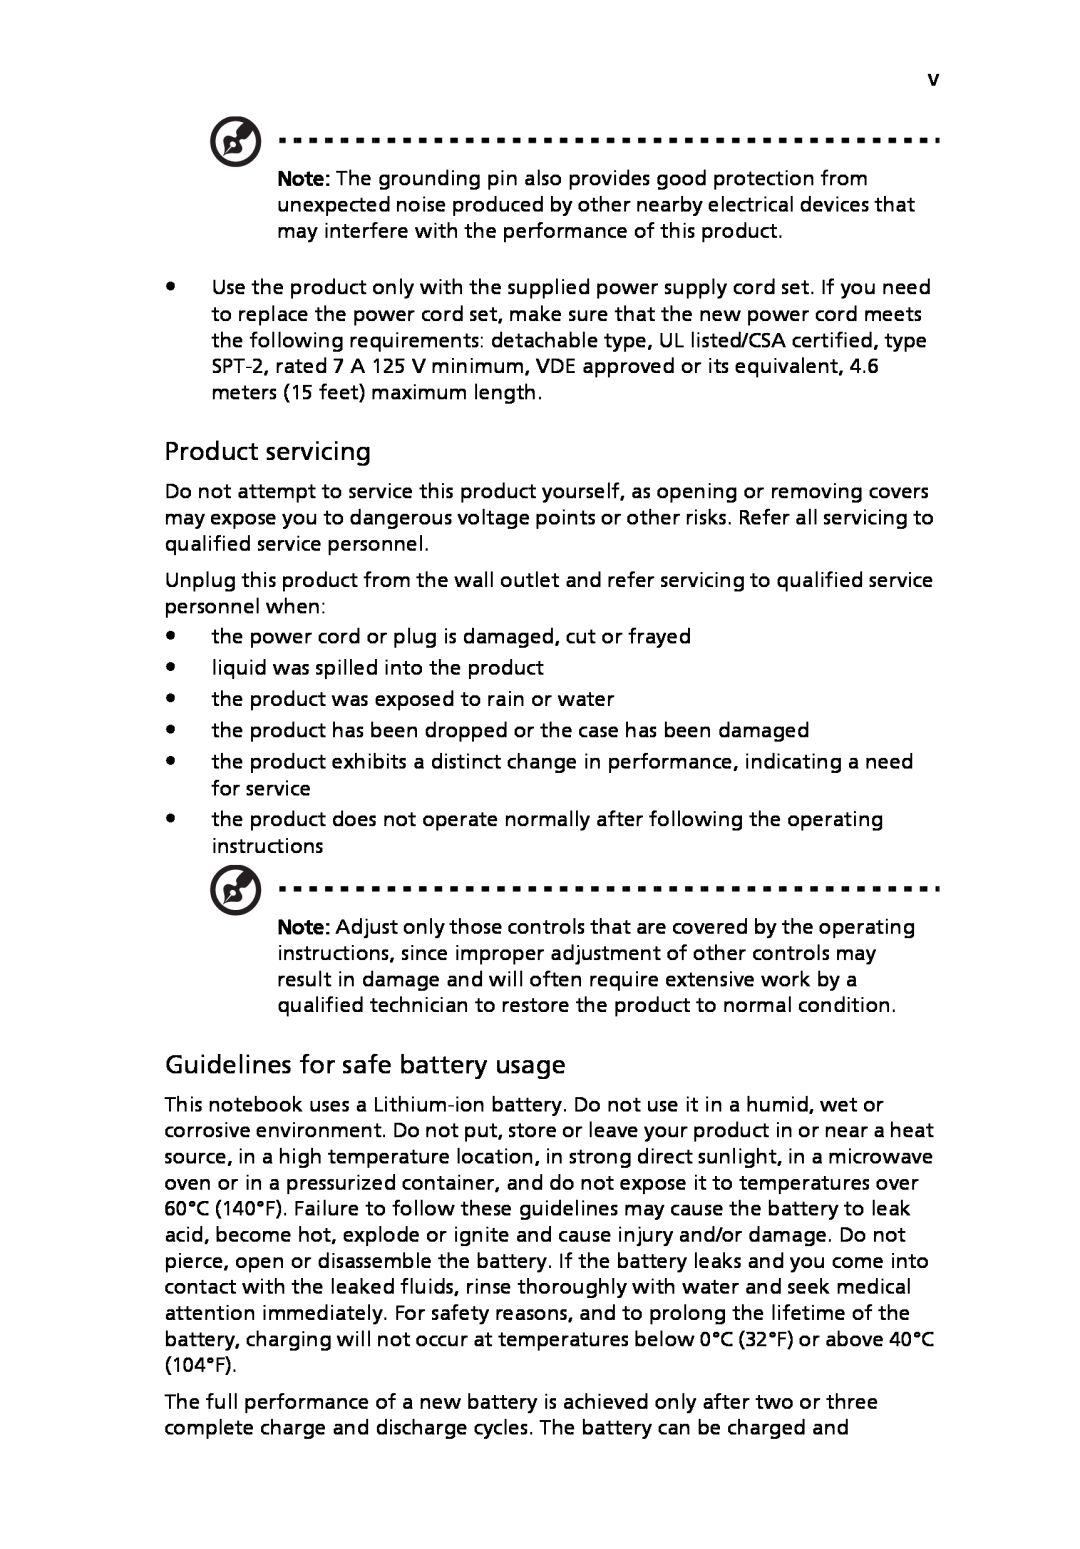 Acer 6492 Series, 6492G manual Product servicing, Guidelines for safe battery usage 